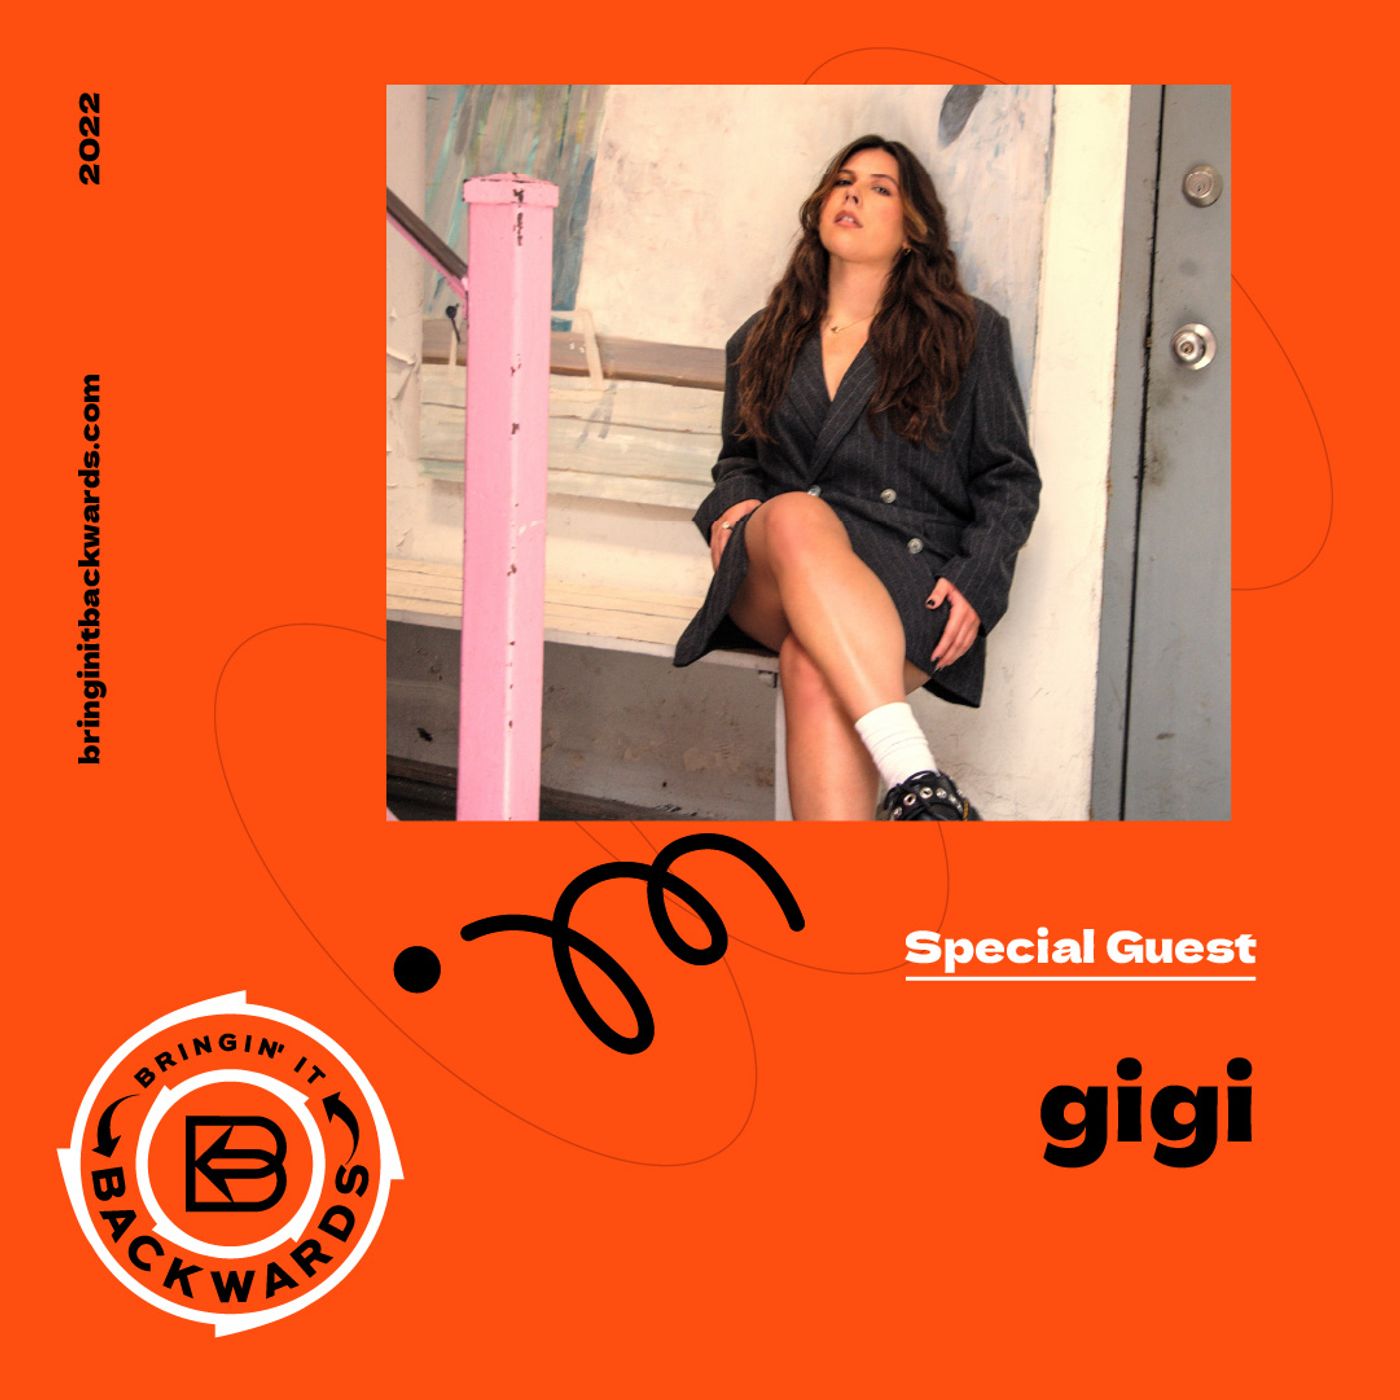 Interview with gigi Image